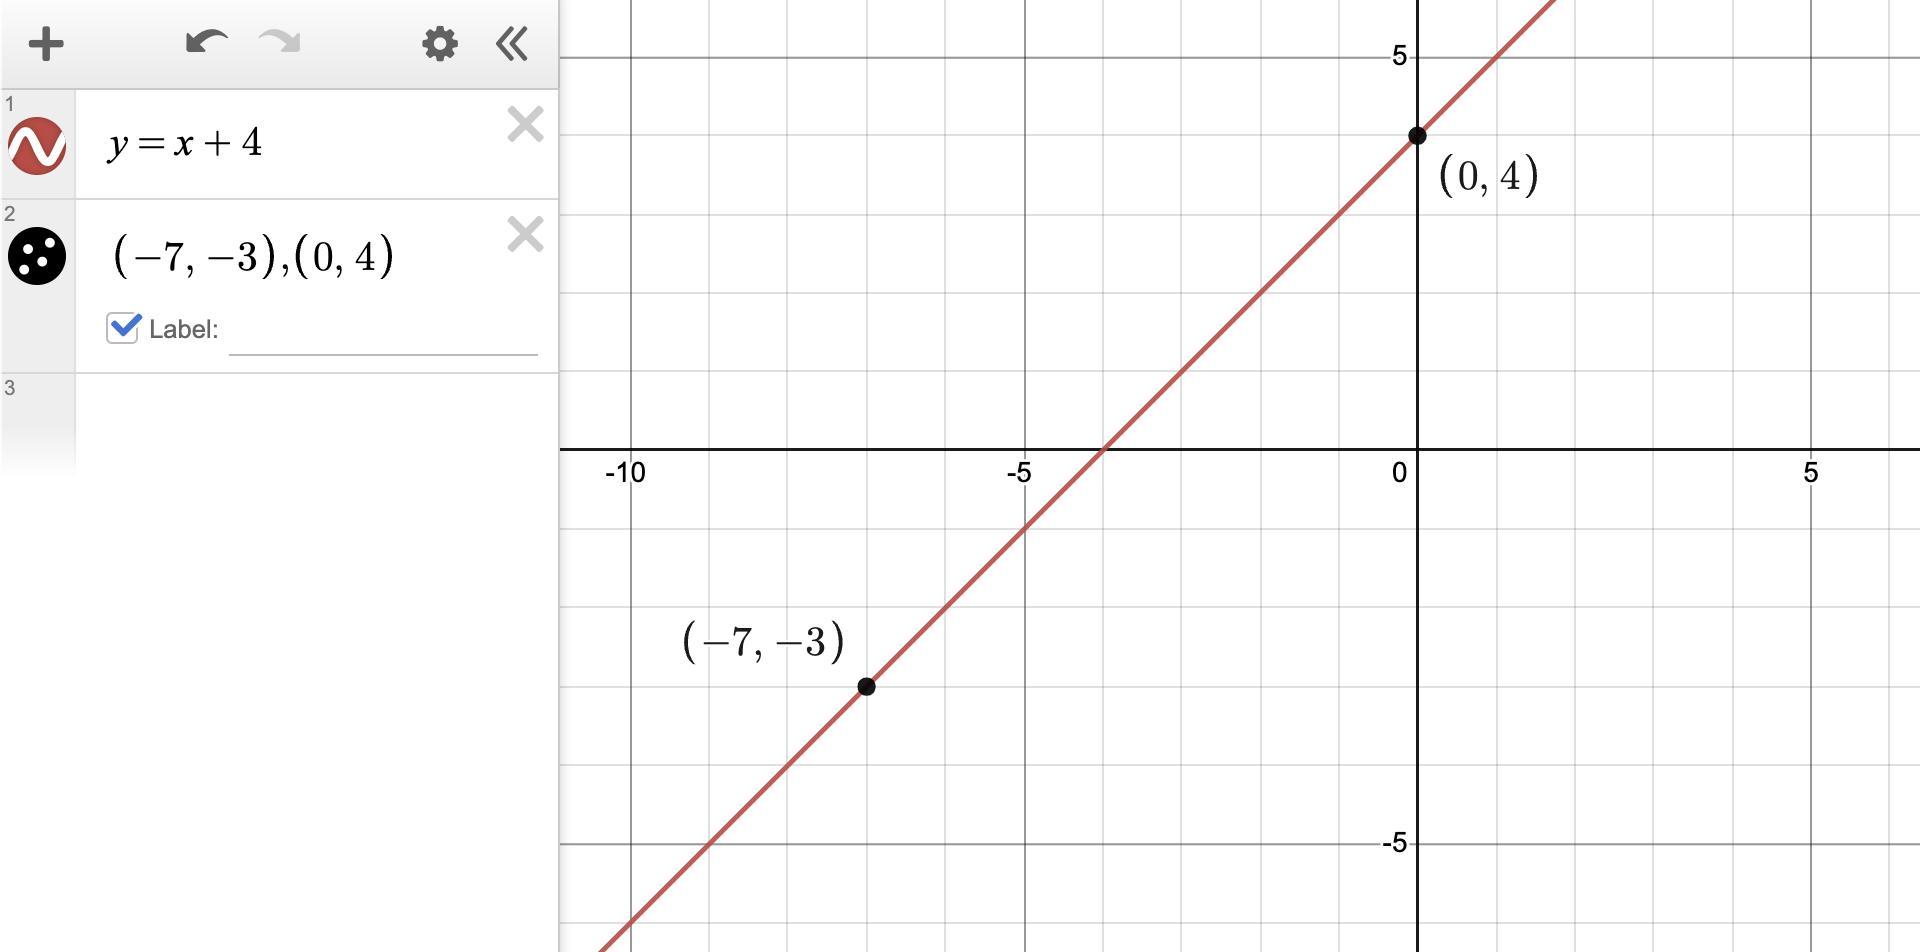 A Line Has A Slope Of 1 And Includes The Points (-7, -3) And (c, 4). What Is The Value Of C